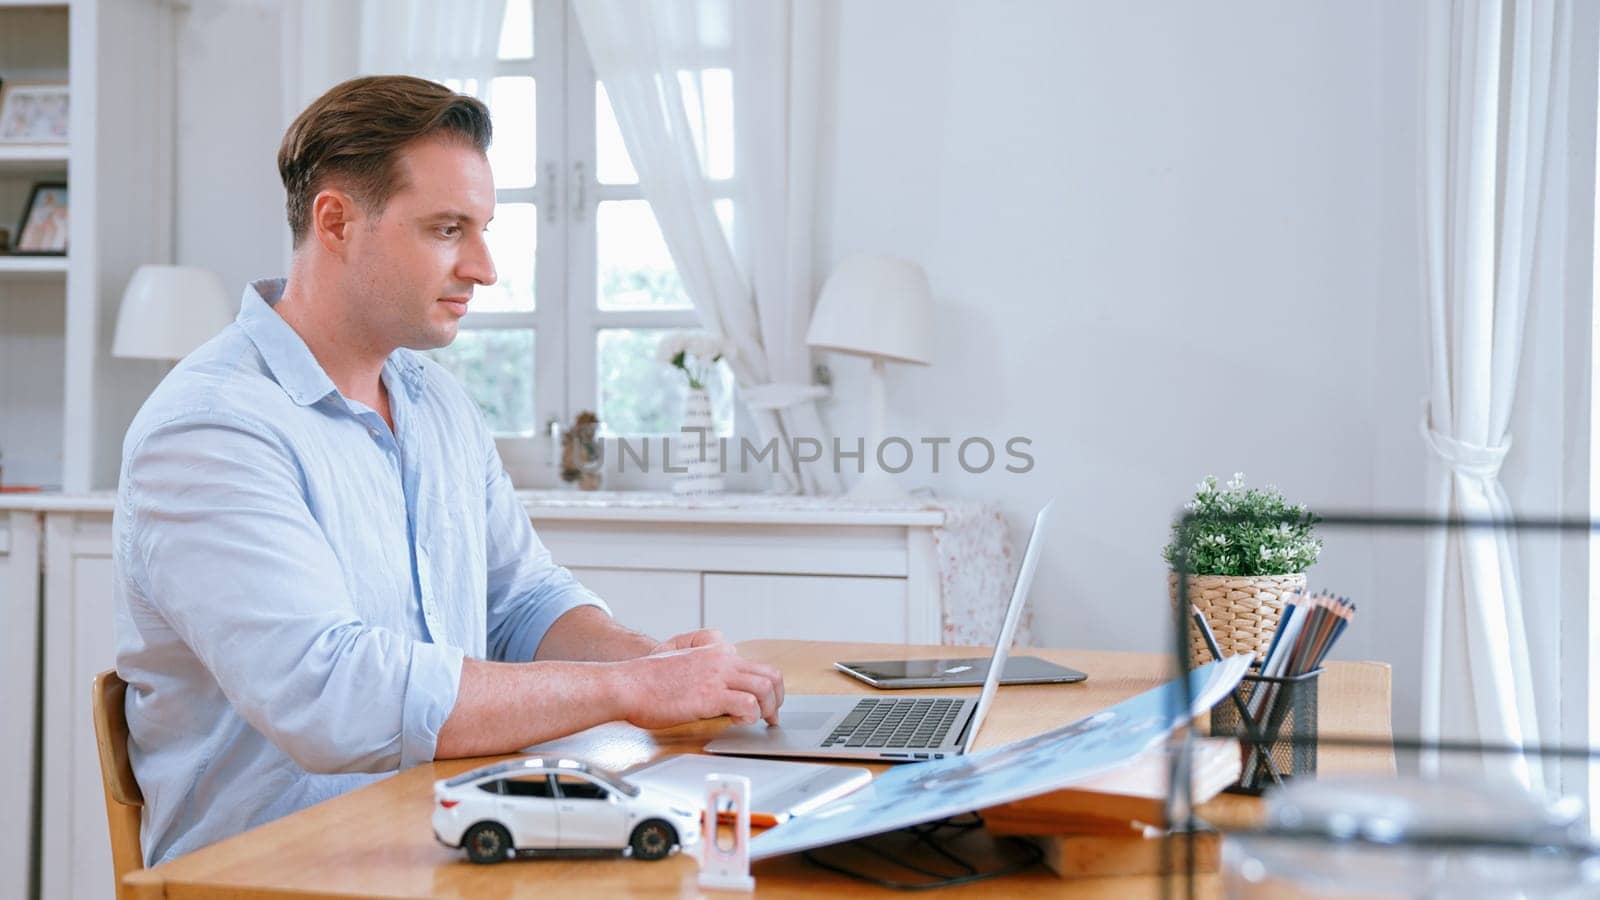 Car design engineer working on car prototype for automobile business at home office. Automotive engineering designer carefully analyze, finding flaws and improvement for car design. Synchronos